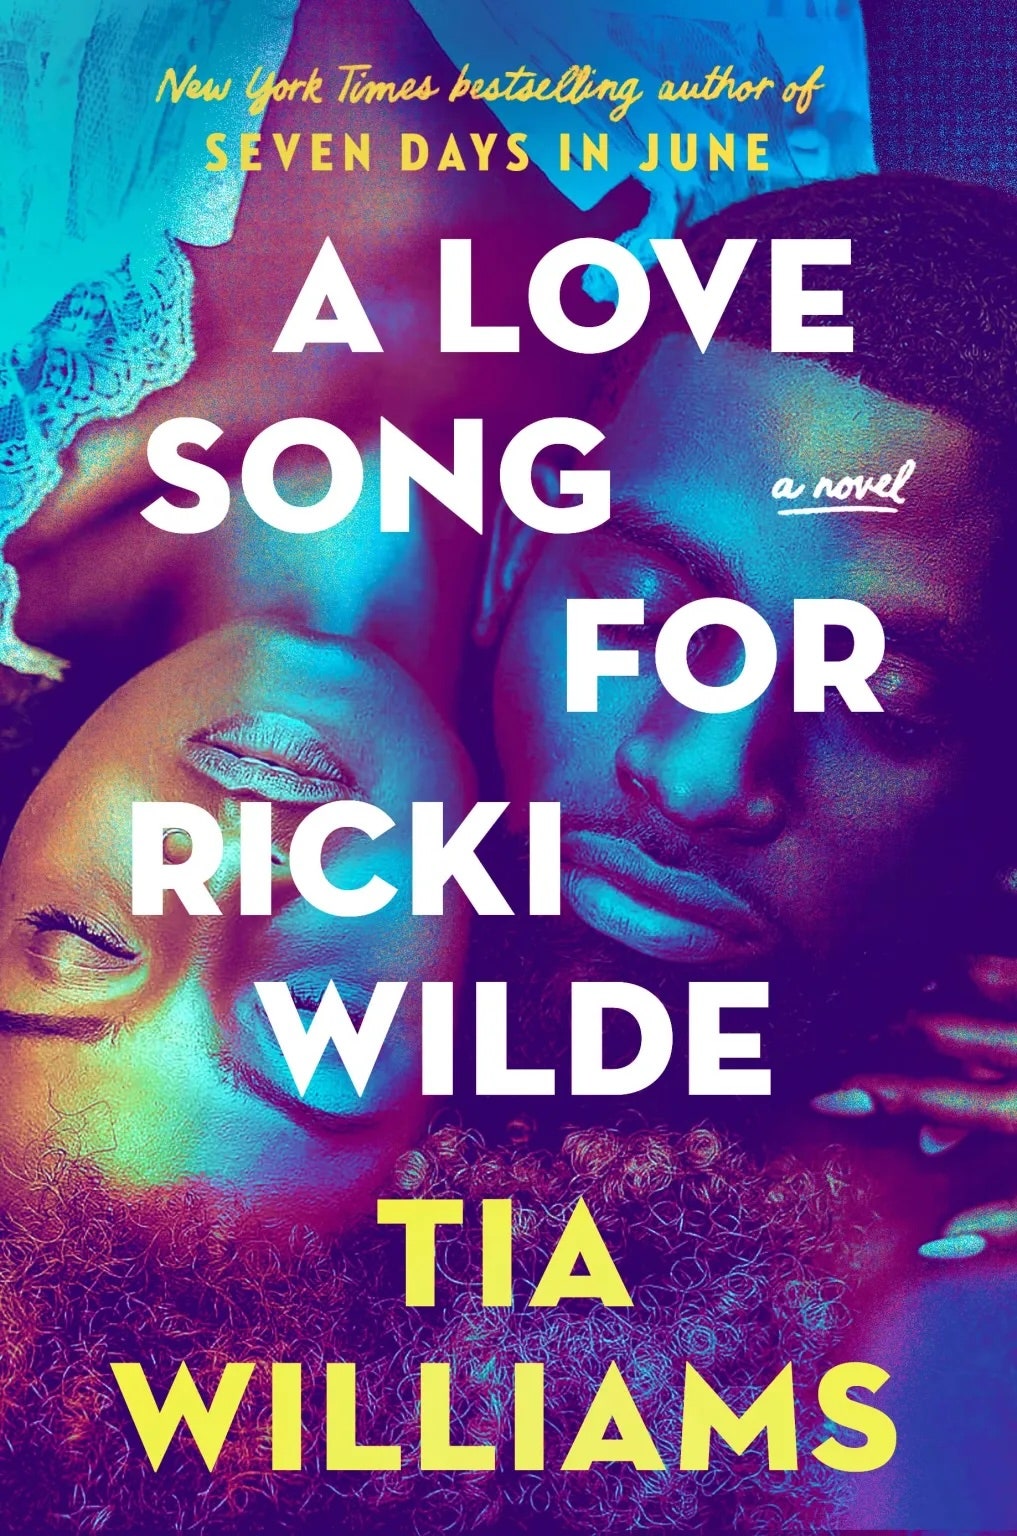 <p>On the surface, <em>A Love Song for Ricki Wilde</em> by Tia Williams is a love story that connects two artists across generations. But in reality, it’s a story about a young woman who takes a chance on herself and her dream. Ricki Wilde is a 20-something year old from Atlanta, Georgia–who comes from a wealthy and <em>meritocratic</em> family. From childhood, she always felt like she didn’t fit in, and maybe there’s good reason for that. Her inability to fit in, in addition to meeting her fairy godmother, leads her to Harlem.</p> <p>As she immerses herself into her new community, which is filled with the history of the Harlem Renaissance, she meets a man. She feels an extraordinary but unexplainable draw to him, with multiple run-ins that don’t seem coincidental. Williams draws readers in with a modern day love story, sprinkled with colloquial humor and Louisiana voodooism. She balances Harlem’s intersection with music throughout history, and the uniqueness that the Harlem Renaissance offered Black Americans in the 1920s. Cross generationally, Williams uses Ricki’s business as a flower shop owner to pay homage to historical figures and places from that time. All of this, in conjunction with intense sex scenes, makes this a perfect book for the hopeless romantic and the history buff.</p> <p><em>-Monique Wilson, editorial assistant</em></p> <p><em>Out now</em></p><p>Sign up for today’s biggest stories, from pop culture to politics.</p><a href="https://www.glamour.com/newsletter/news?sourceCode=msnsend">Sign Up</a>